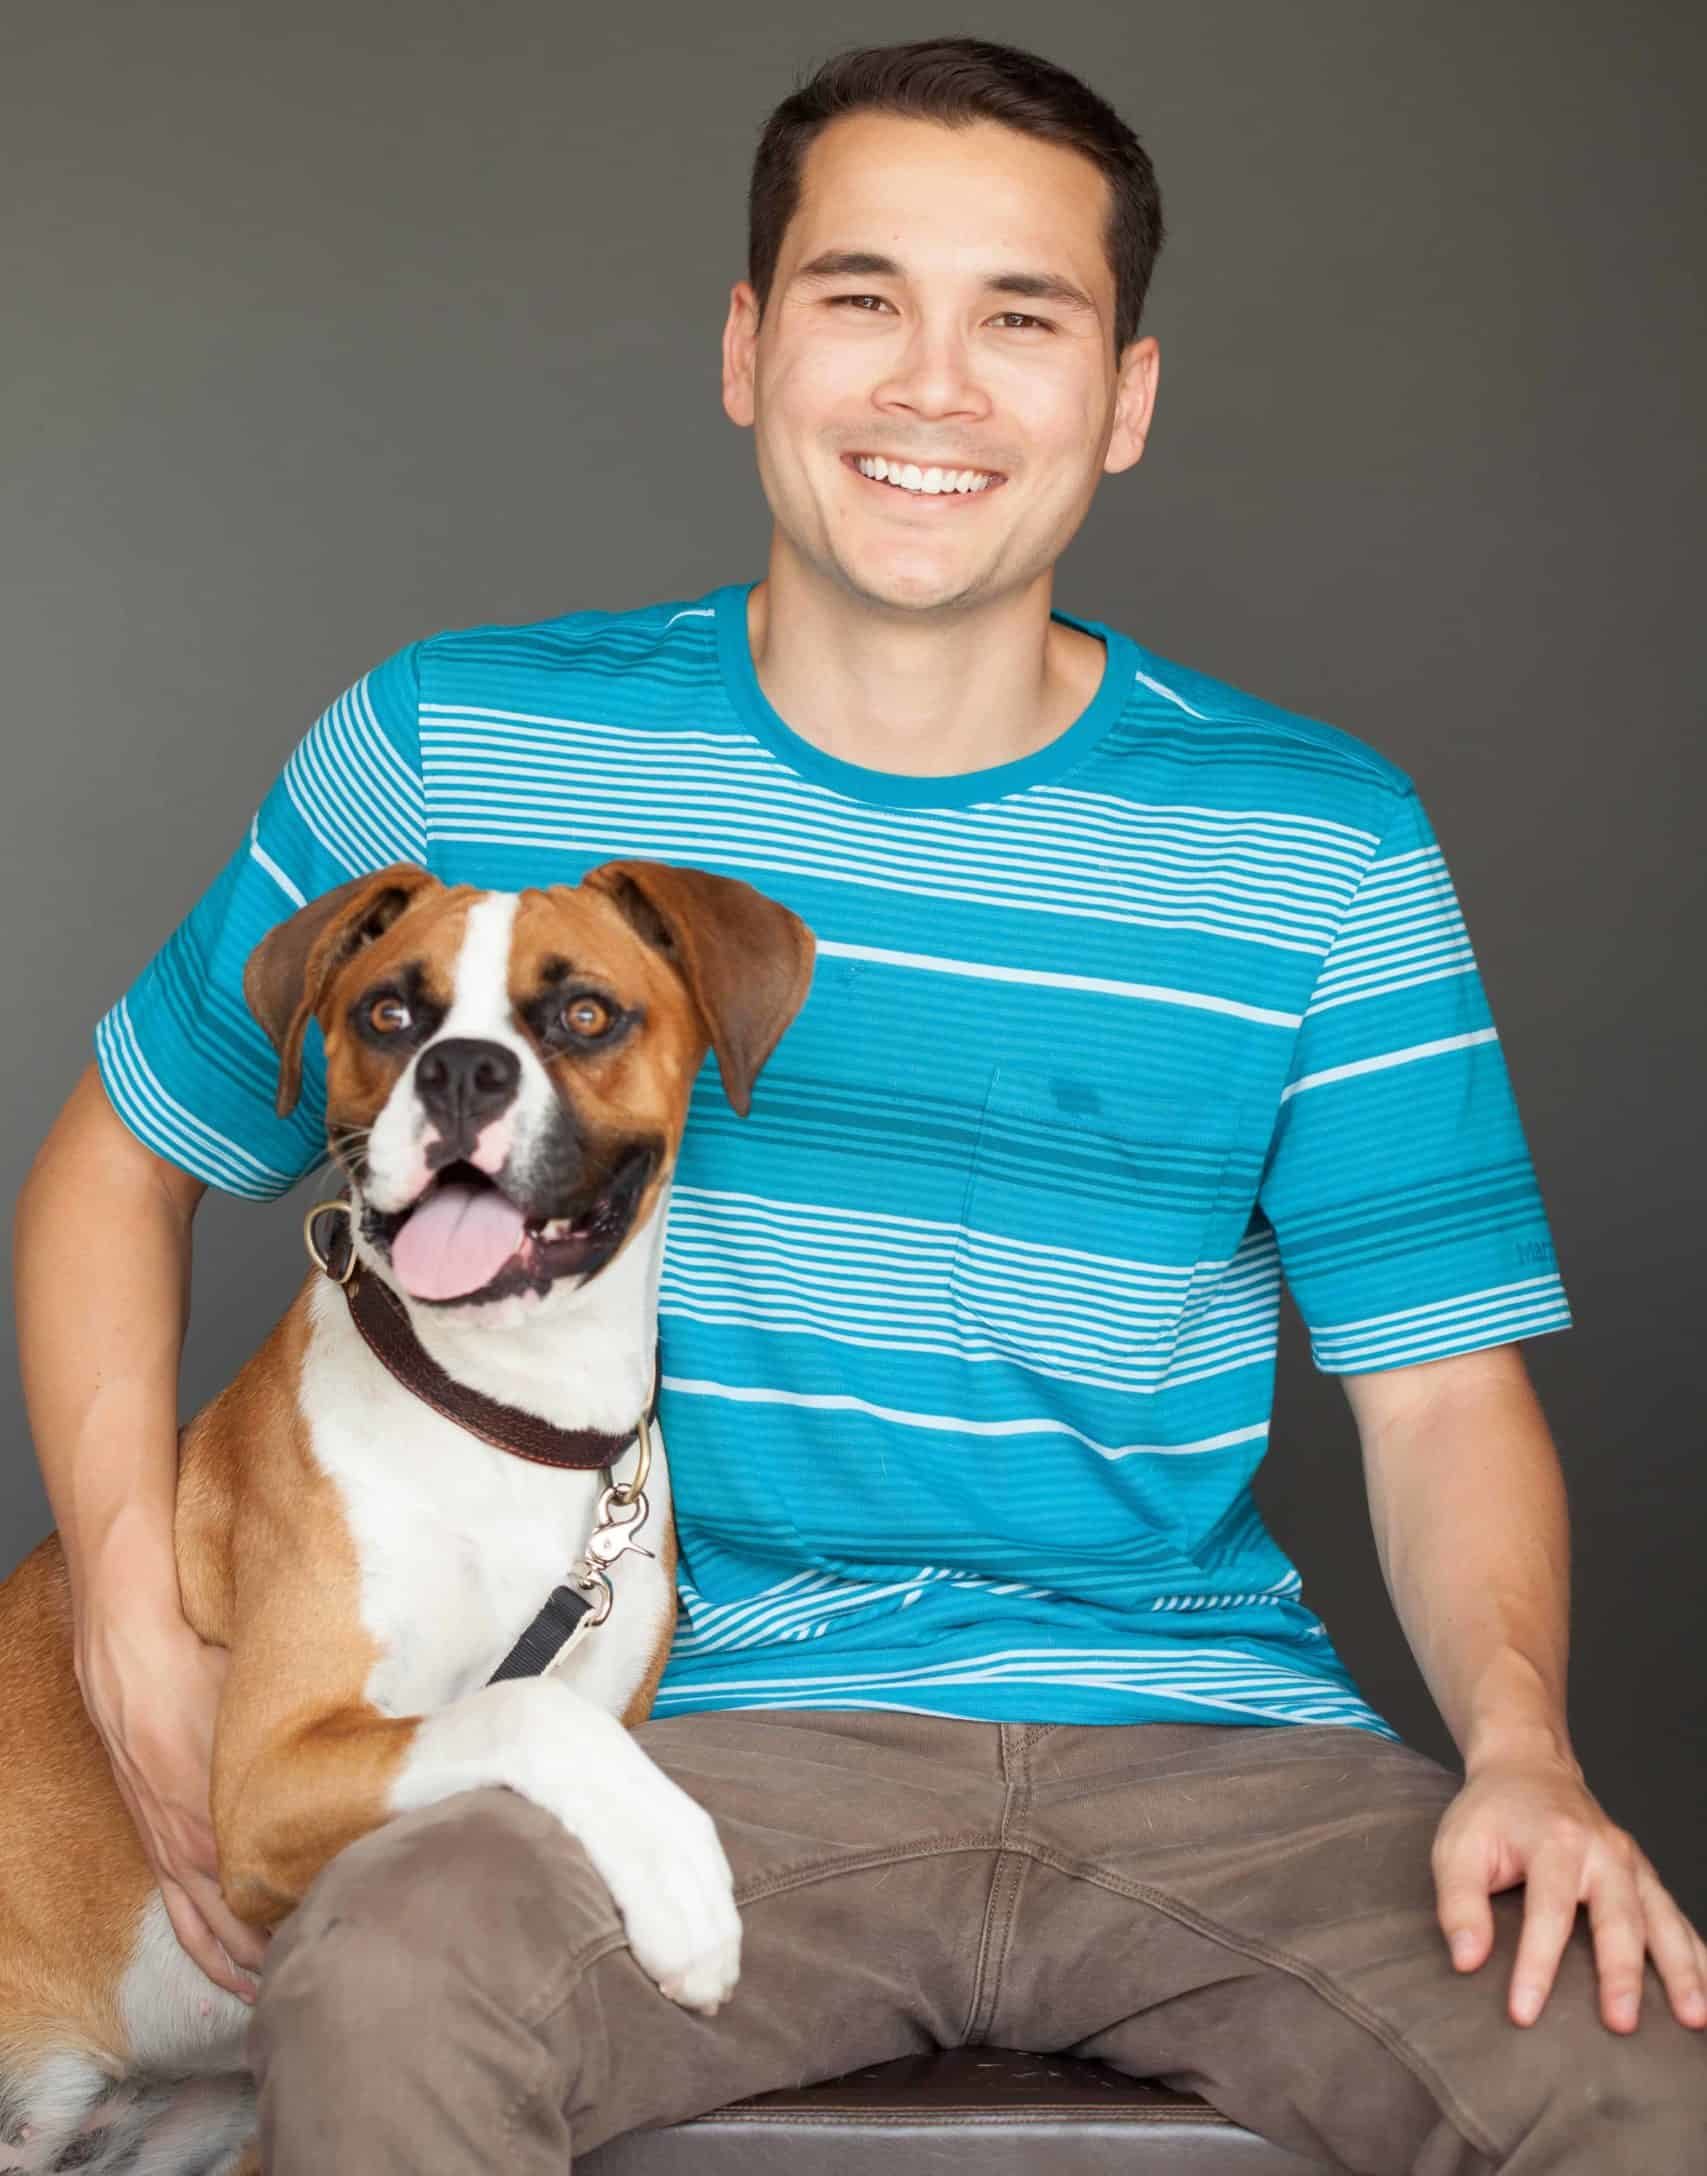 Kyle Goguen, founder of Pawstruck.com, and Tyson, the company's chief canine officer.